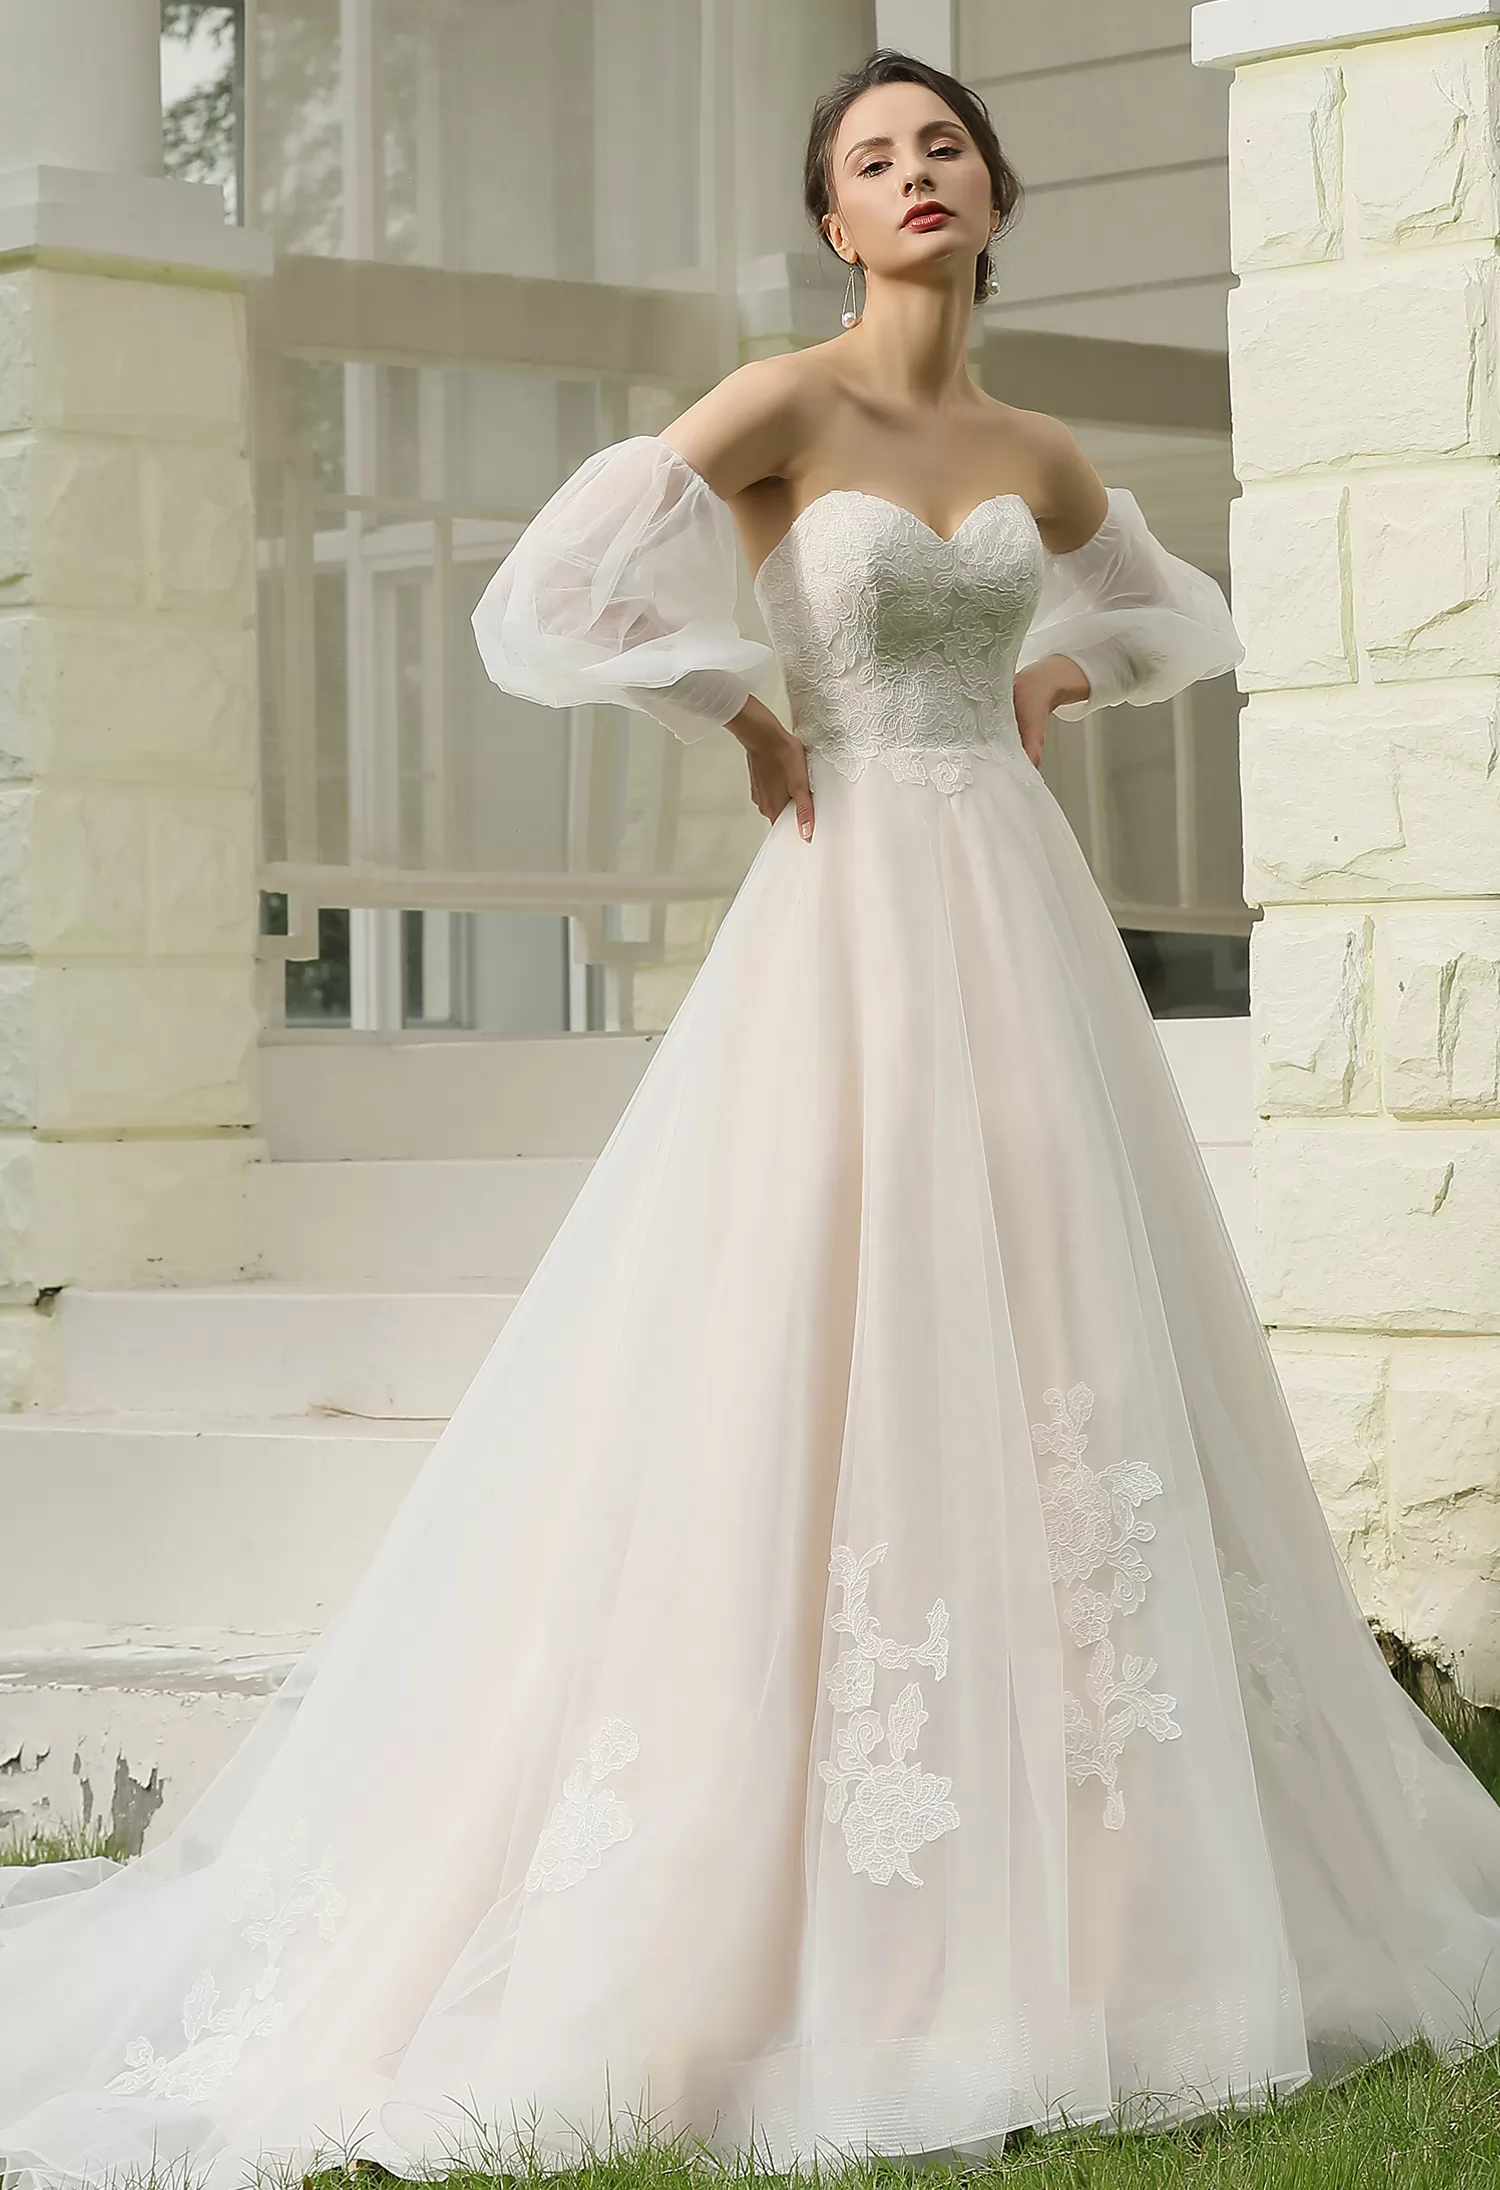 Classic A-Line Strapless Wedding Dress With Detachable Bishop Sleeves